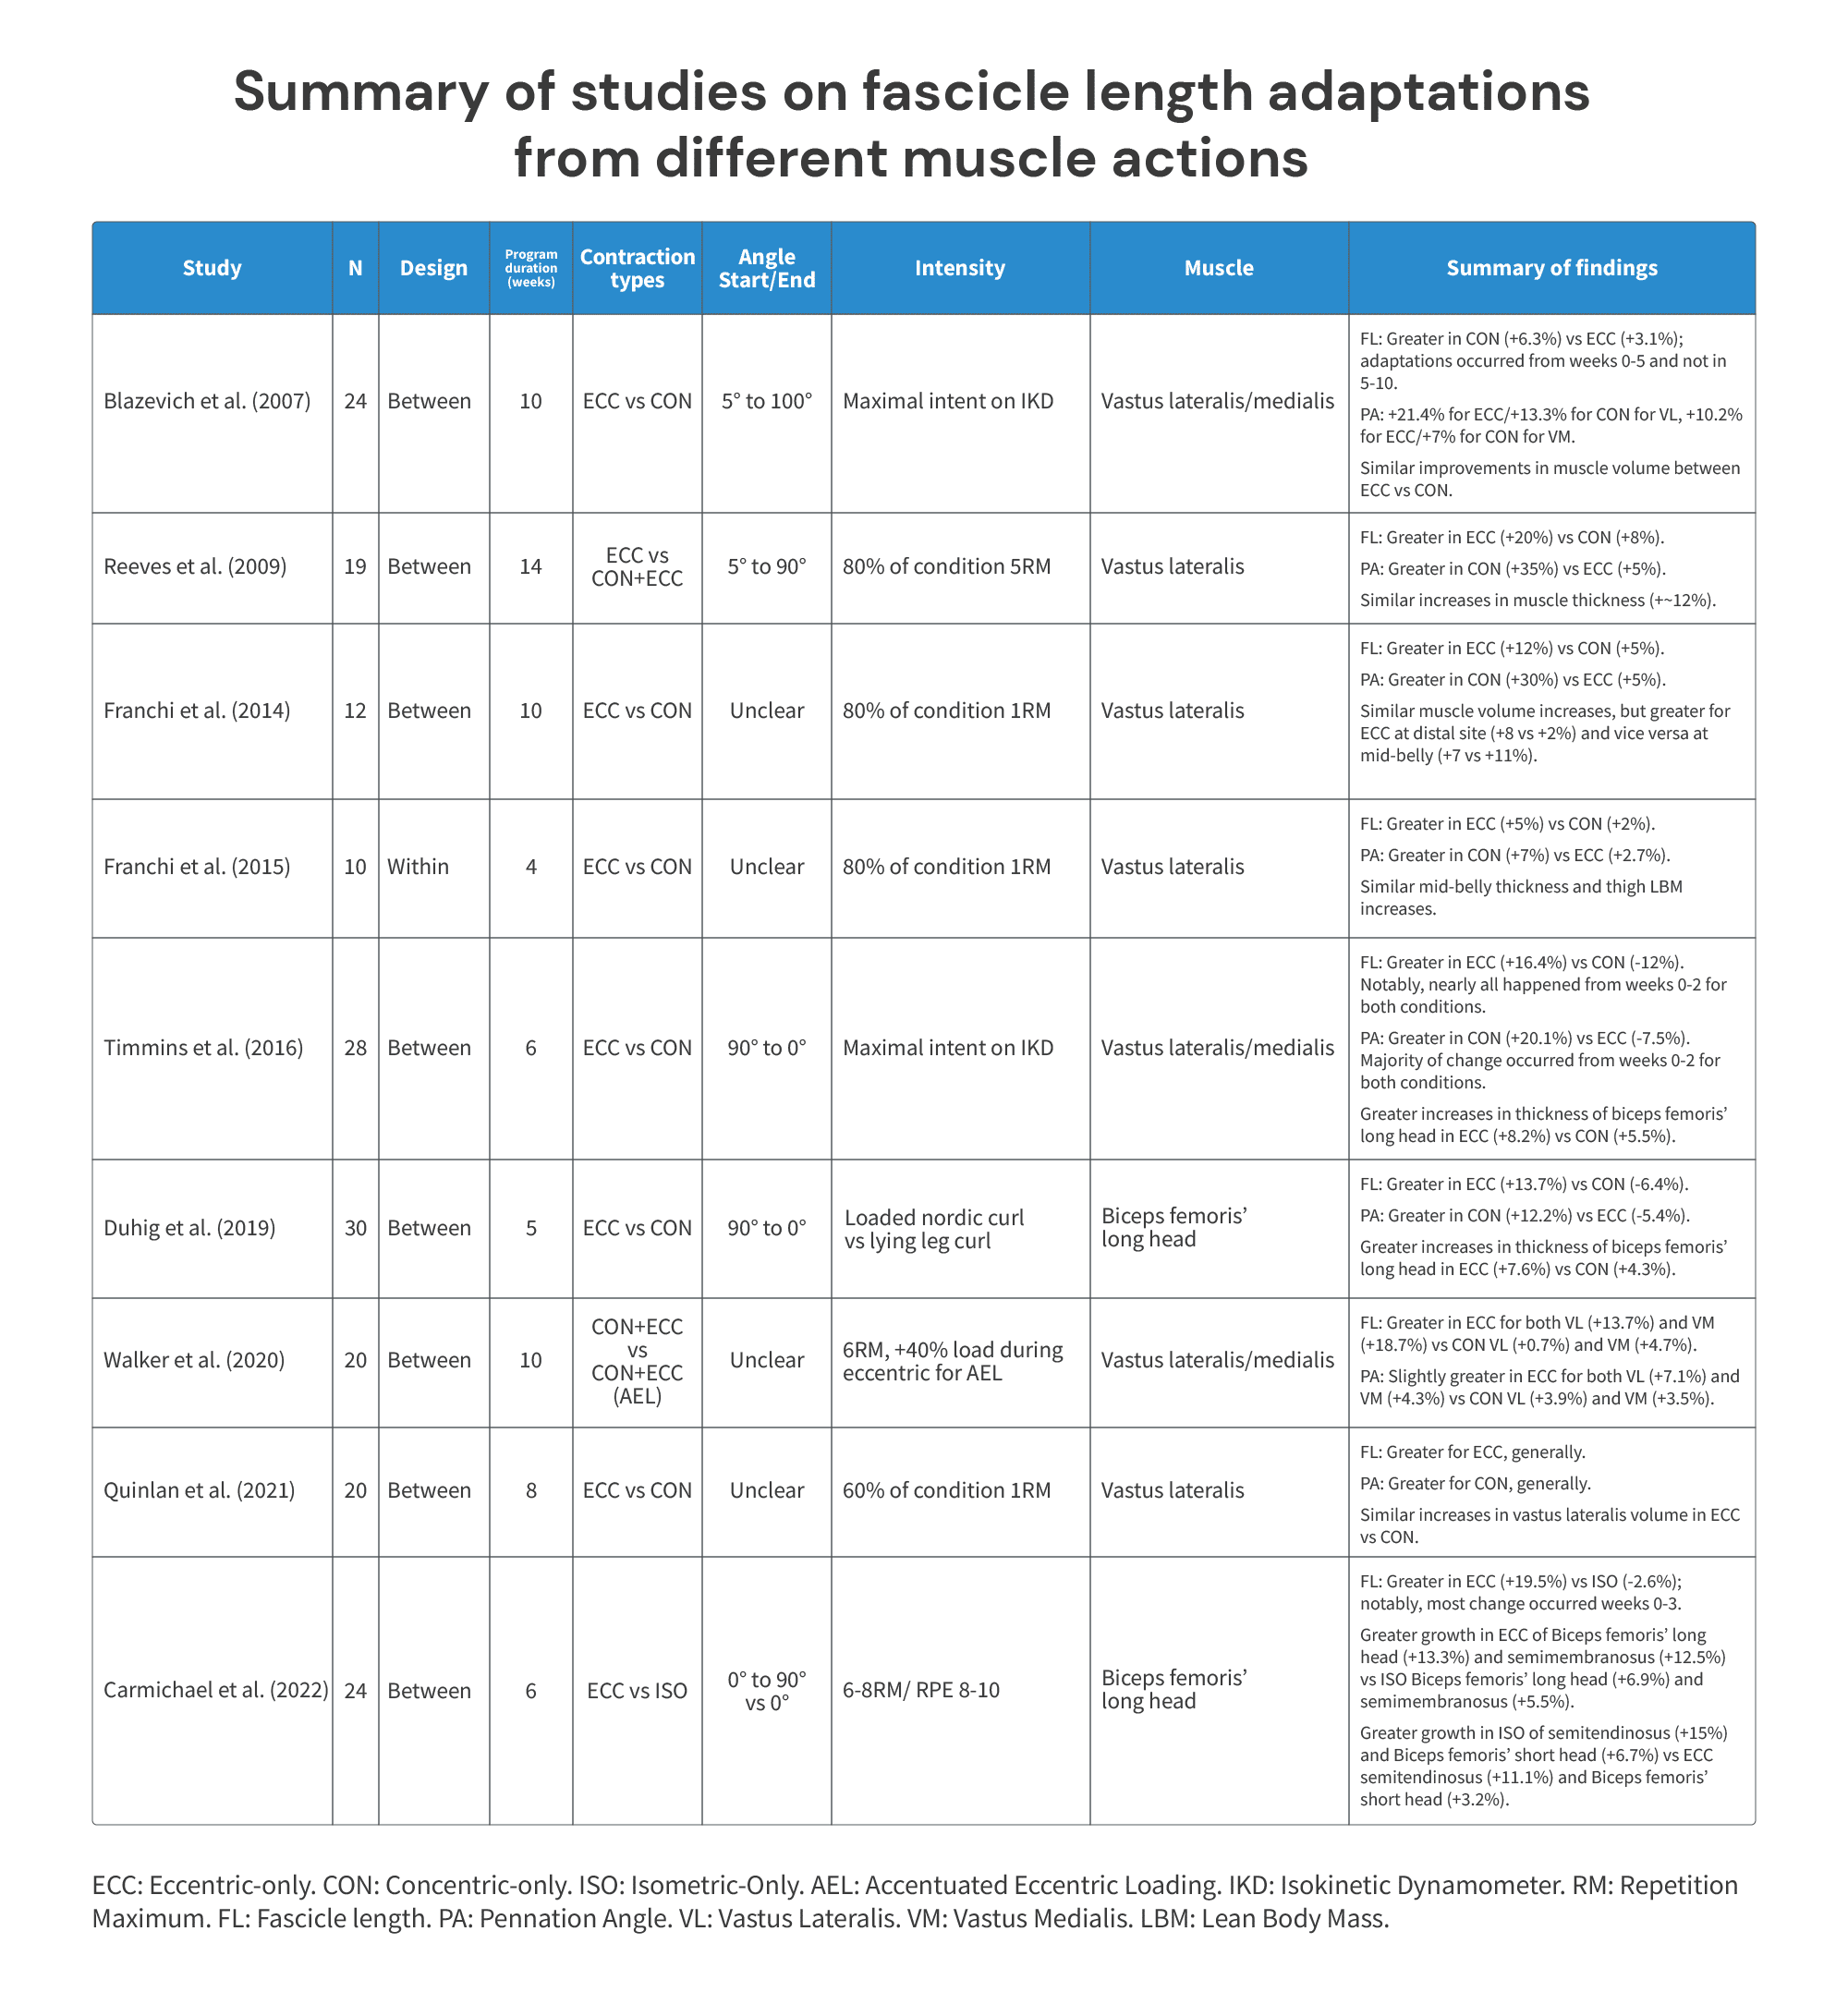 Summary of studies on fascicle length adaptations from different muscle actions